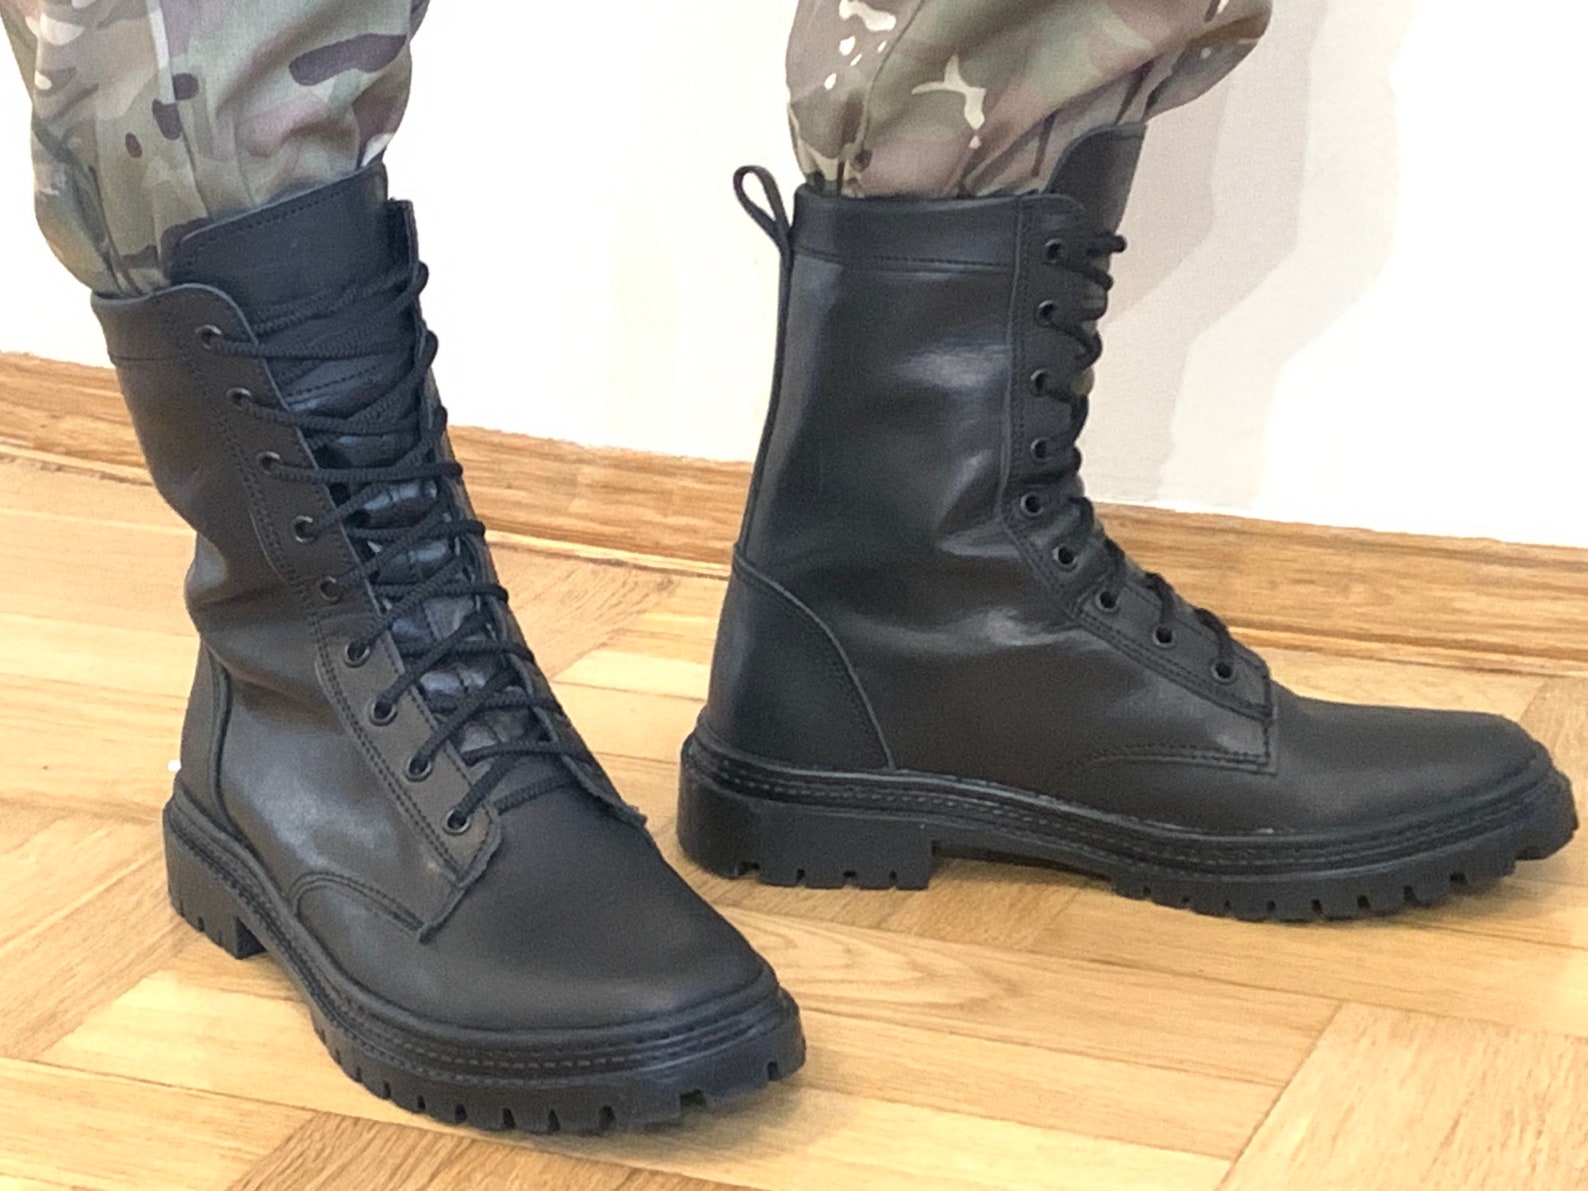 Ukrainian Leather Boots Army Special Forces Boots Military - Etsy